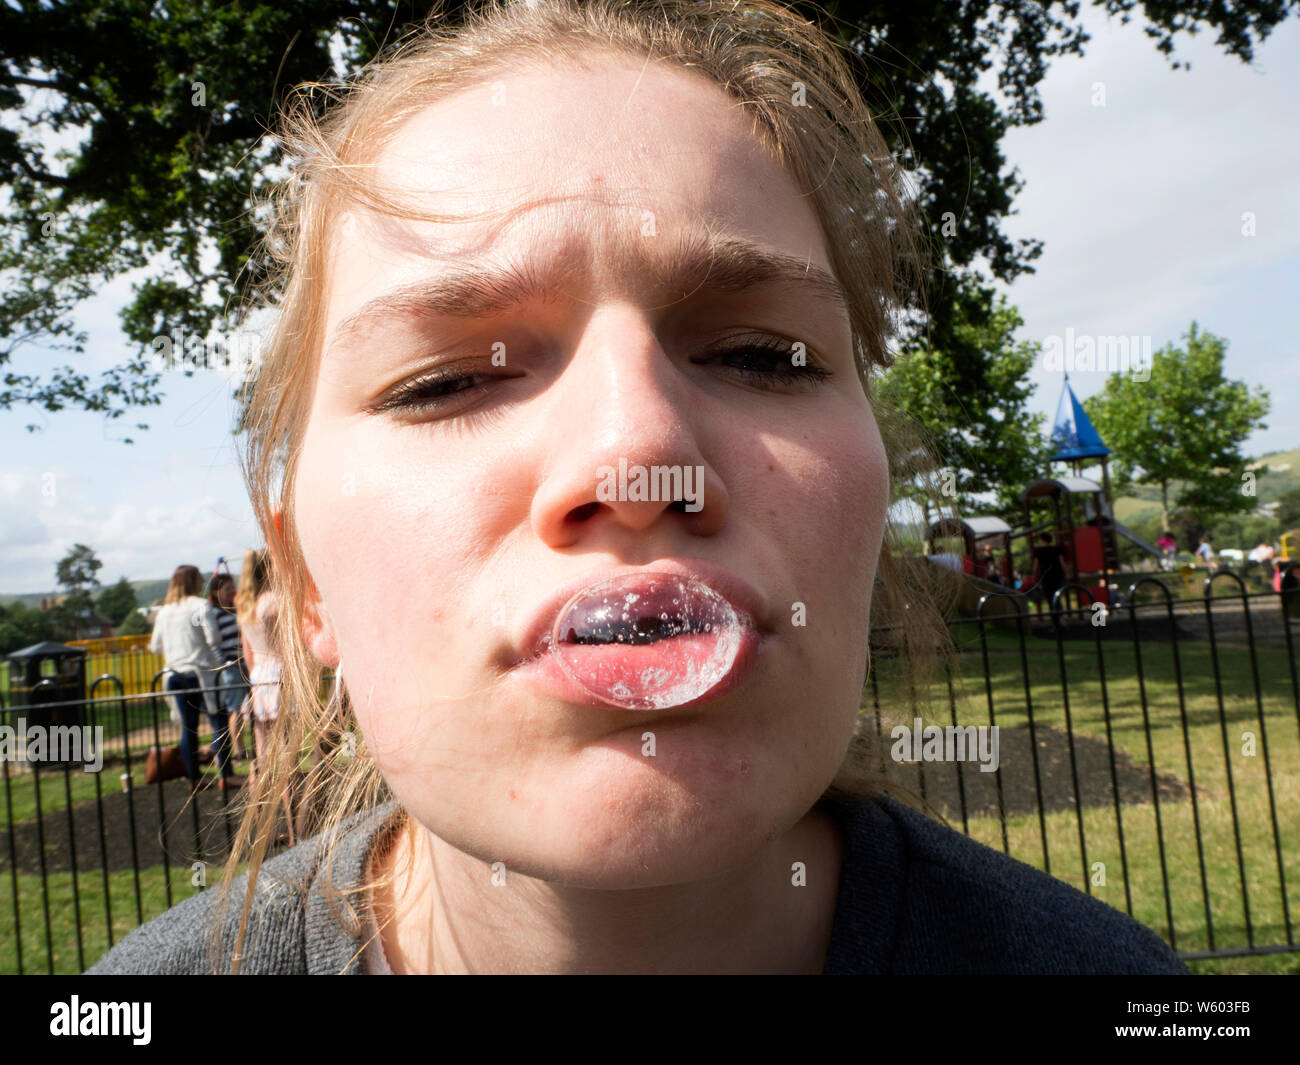 Teenage Girl Blowing Bubble From Her Mouth With Her Spit Stock Photo